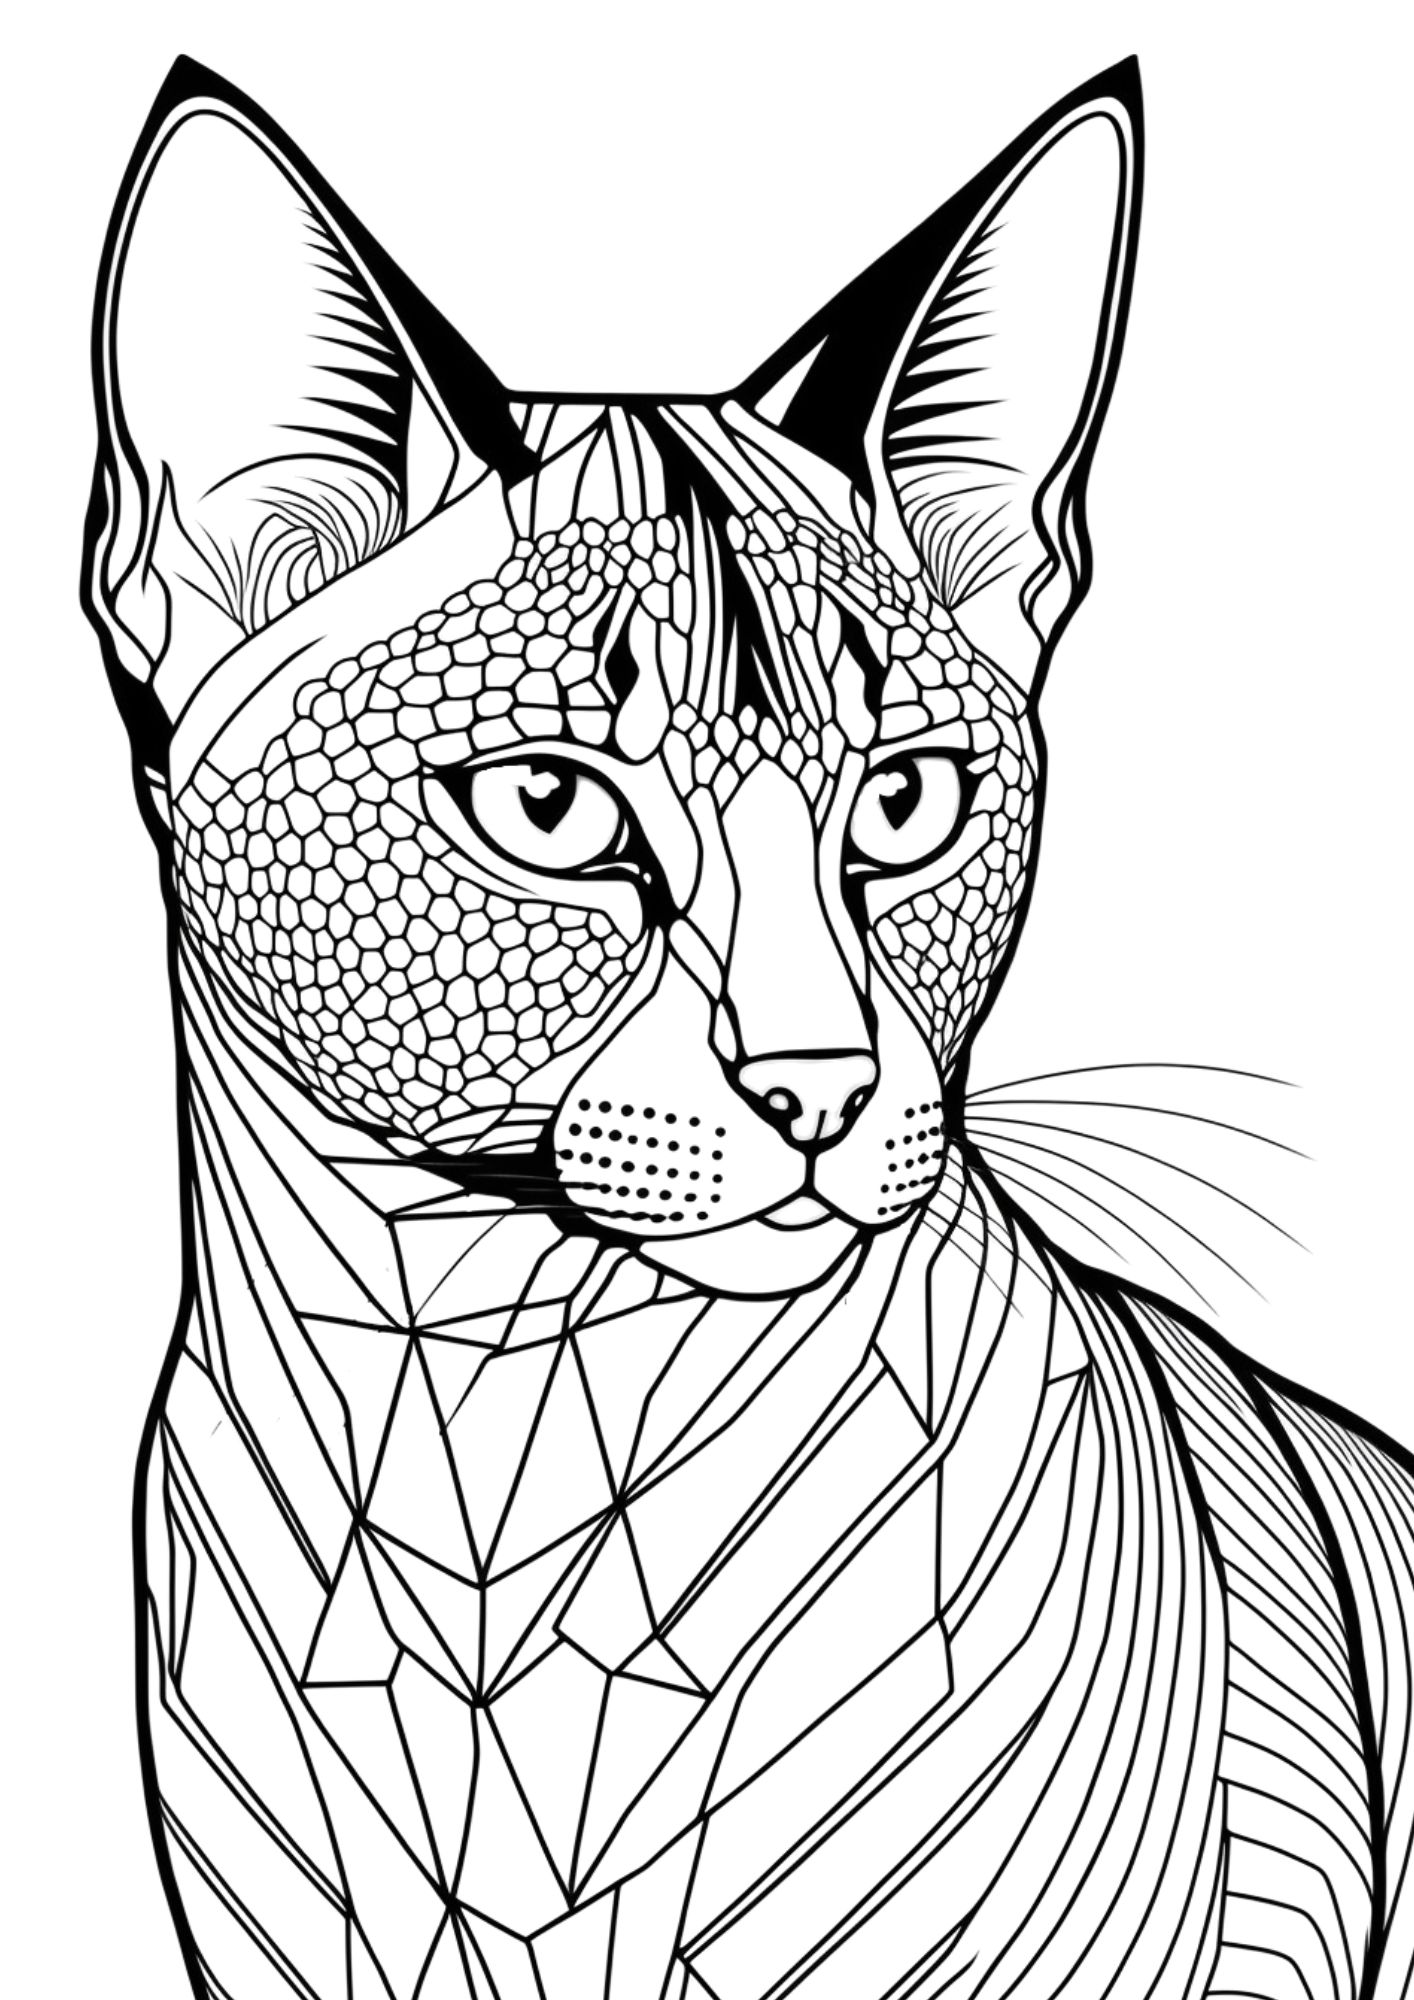 Free printable animal coloring pages for adults relax unwind and color